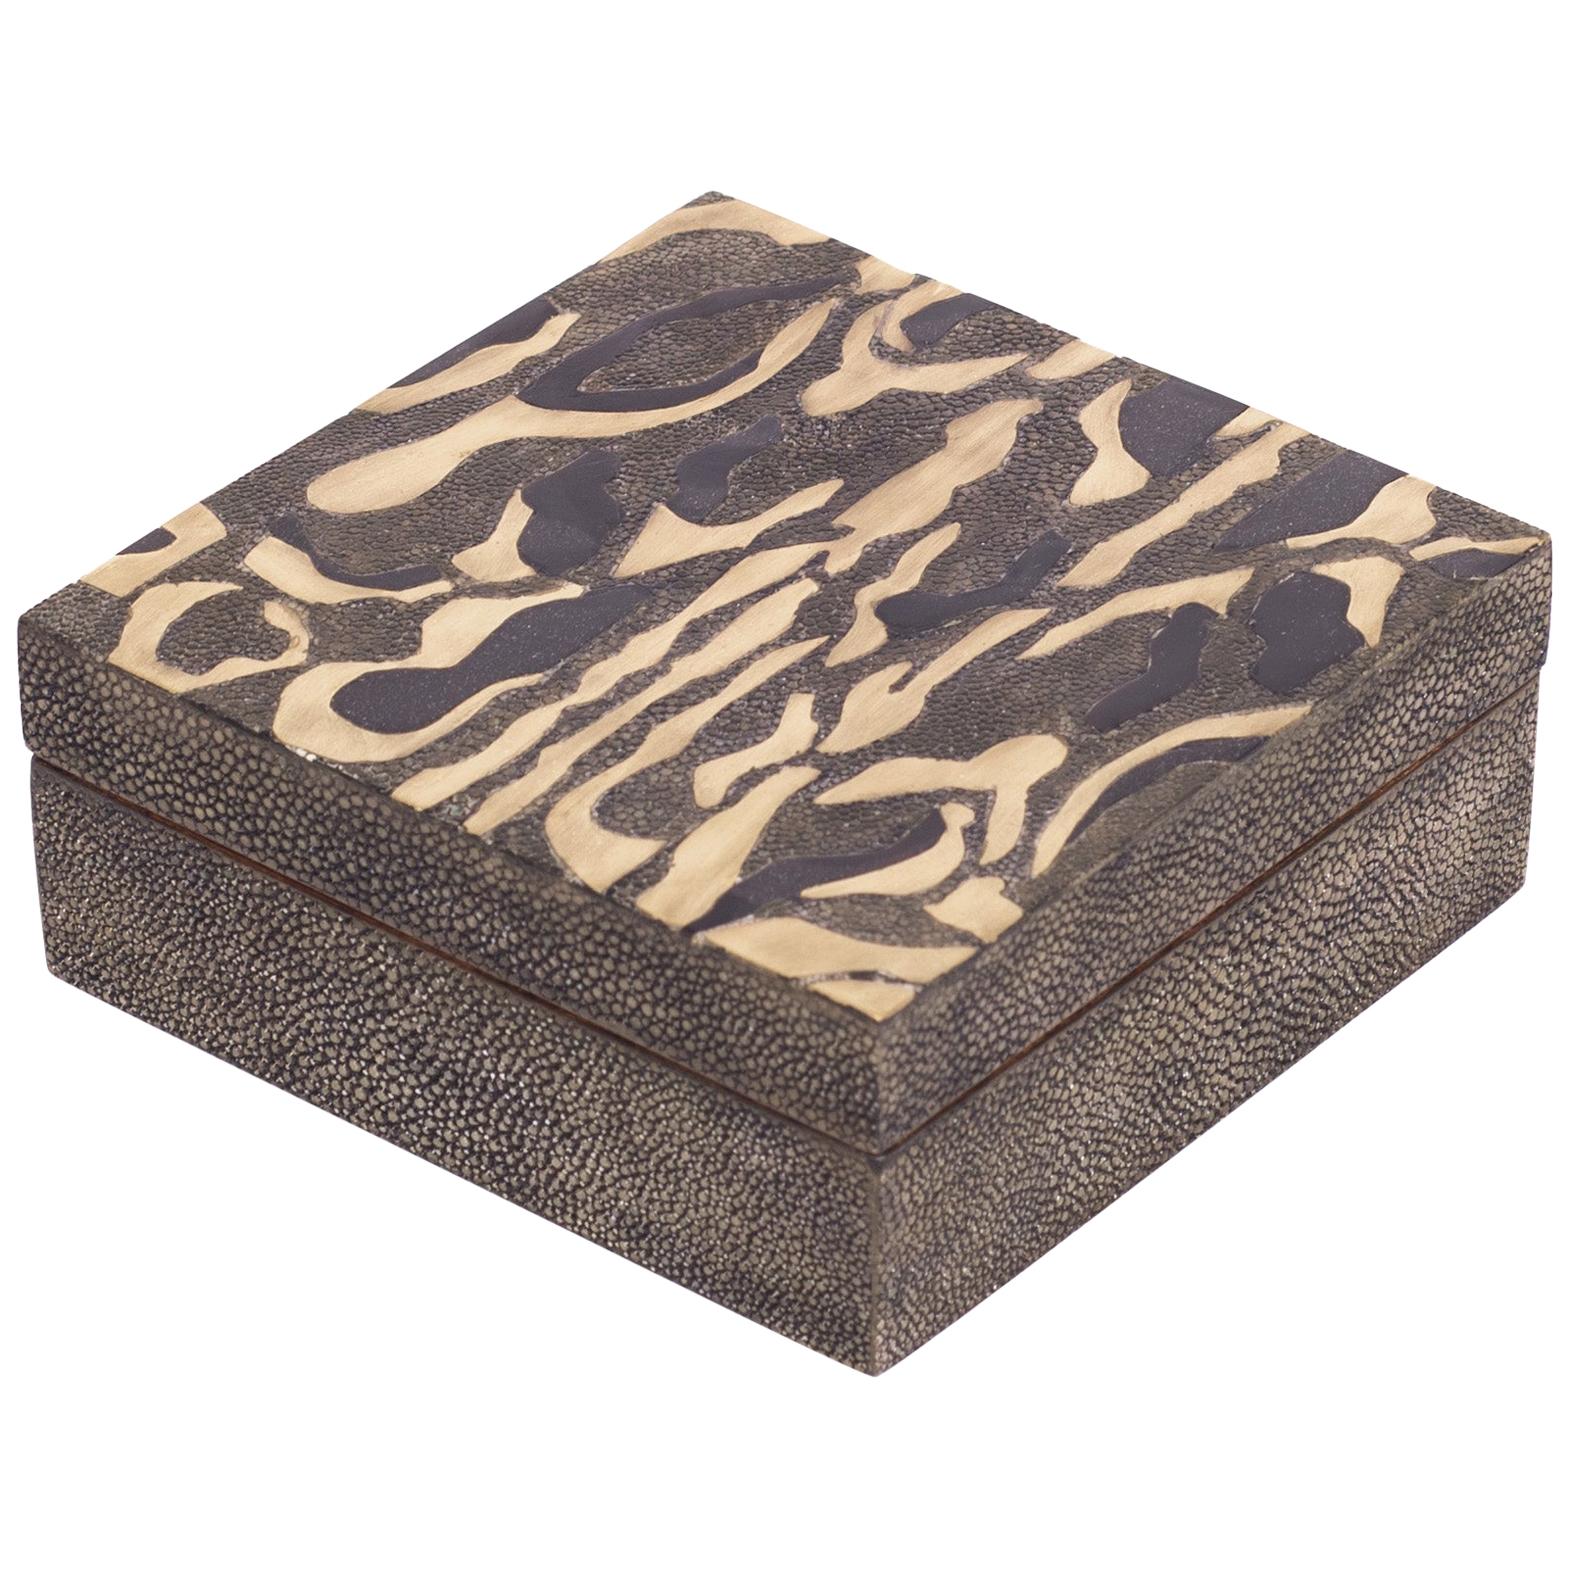 Shagreen Leopard Pattern Box with Shell and Brass Details by Kifu Paris